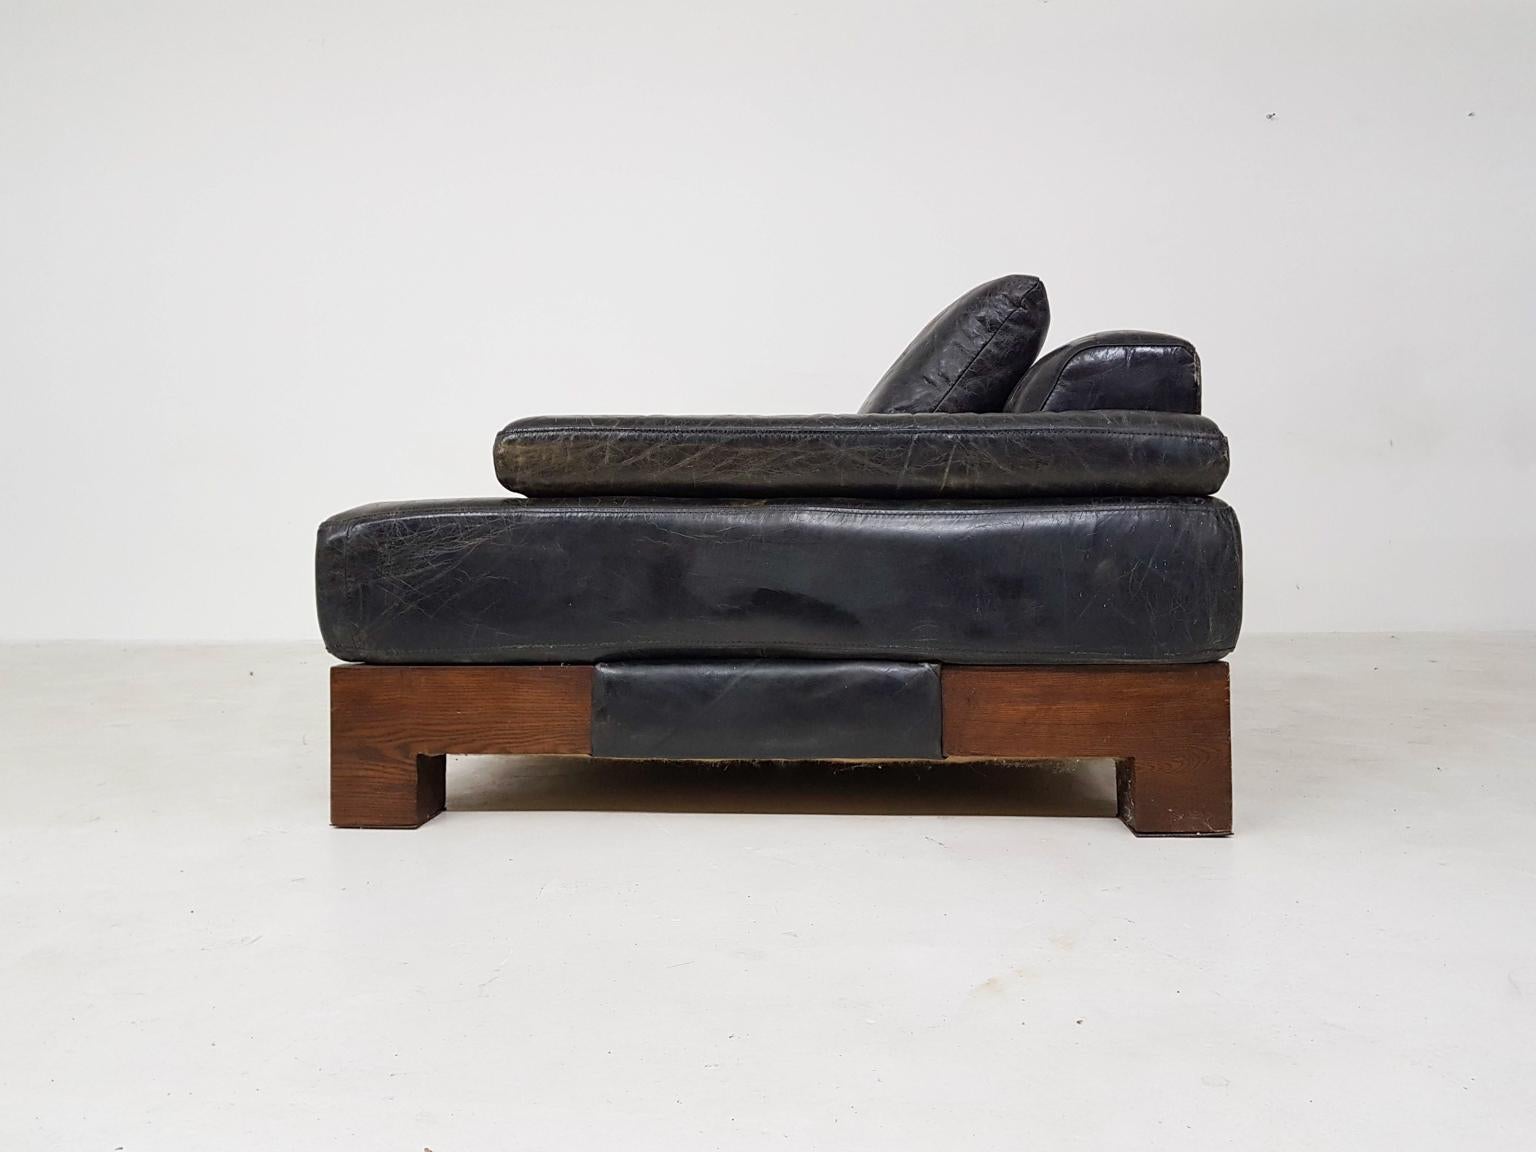 European Mid-Century Modern Leather and Wenge Sofa or Daybed